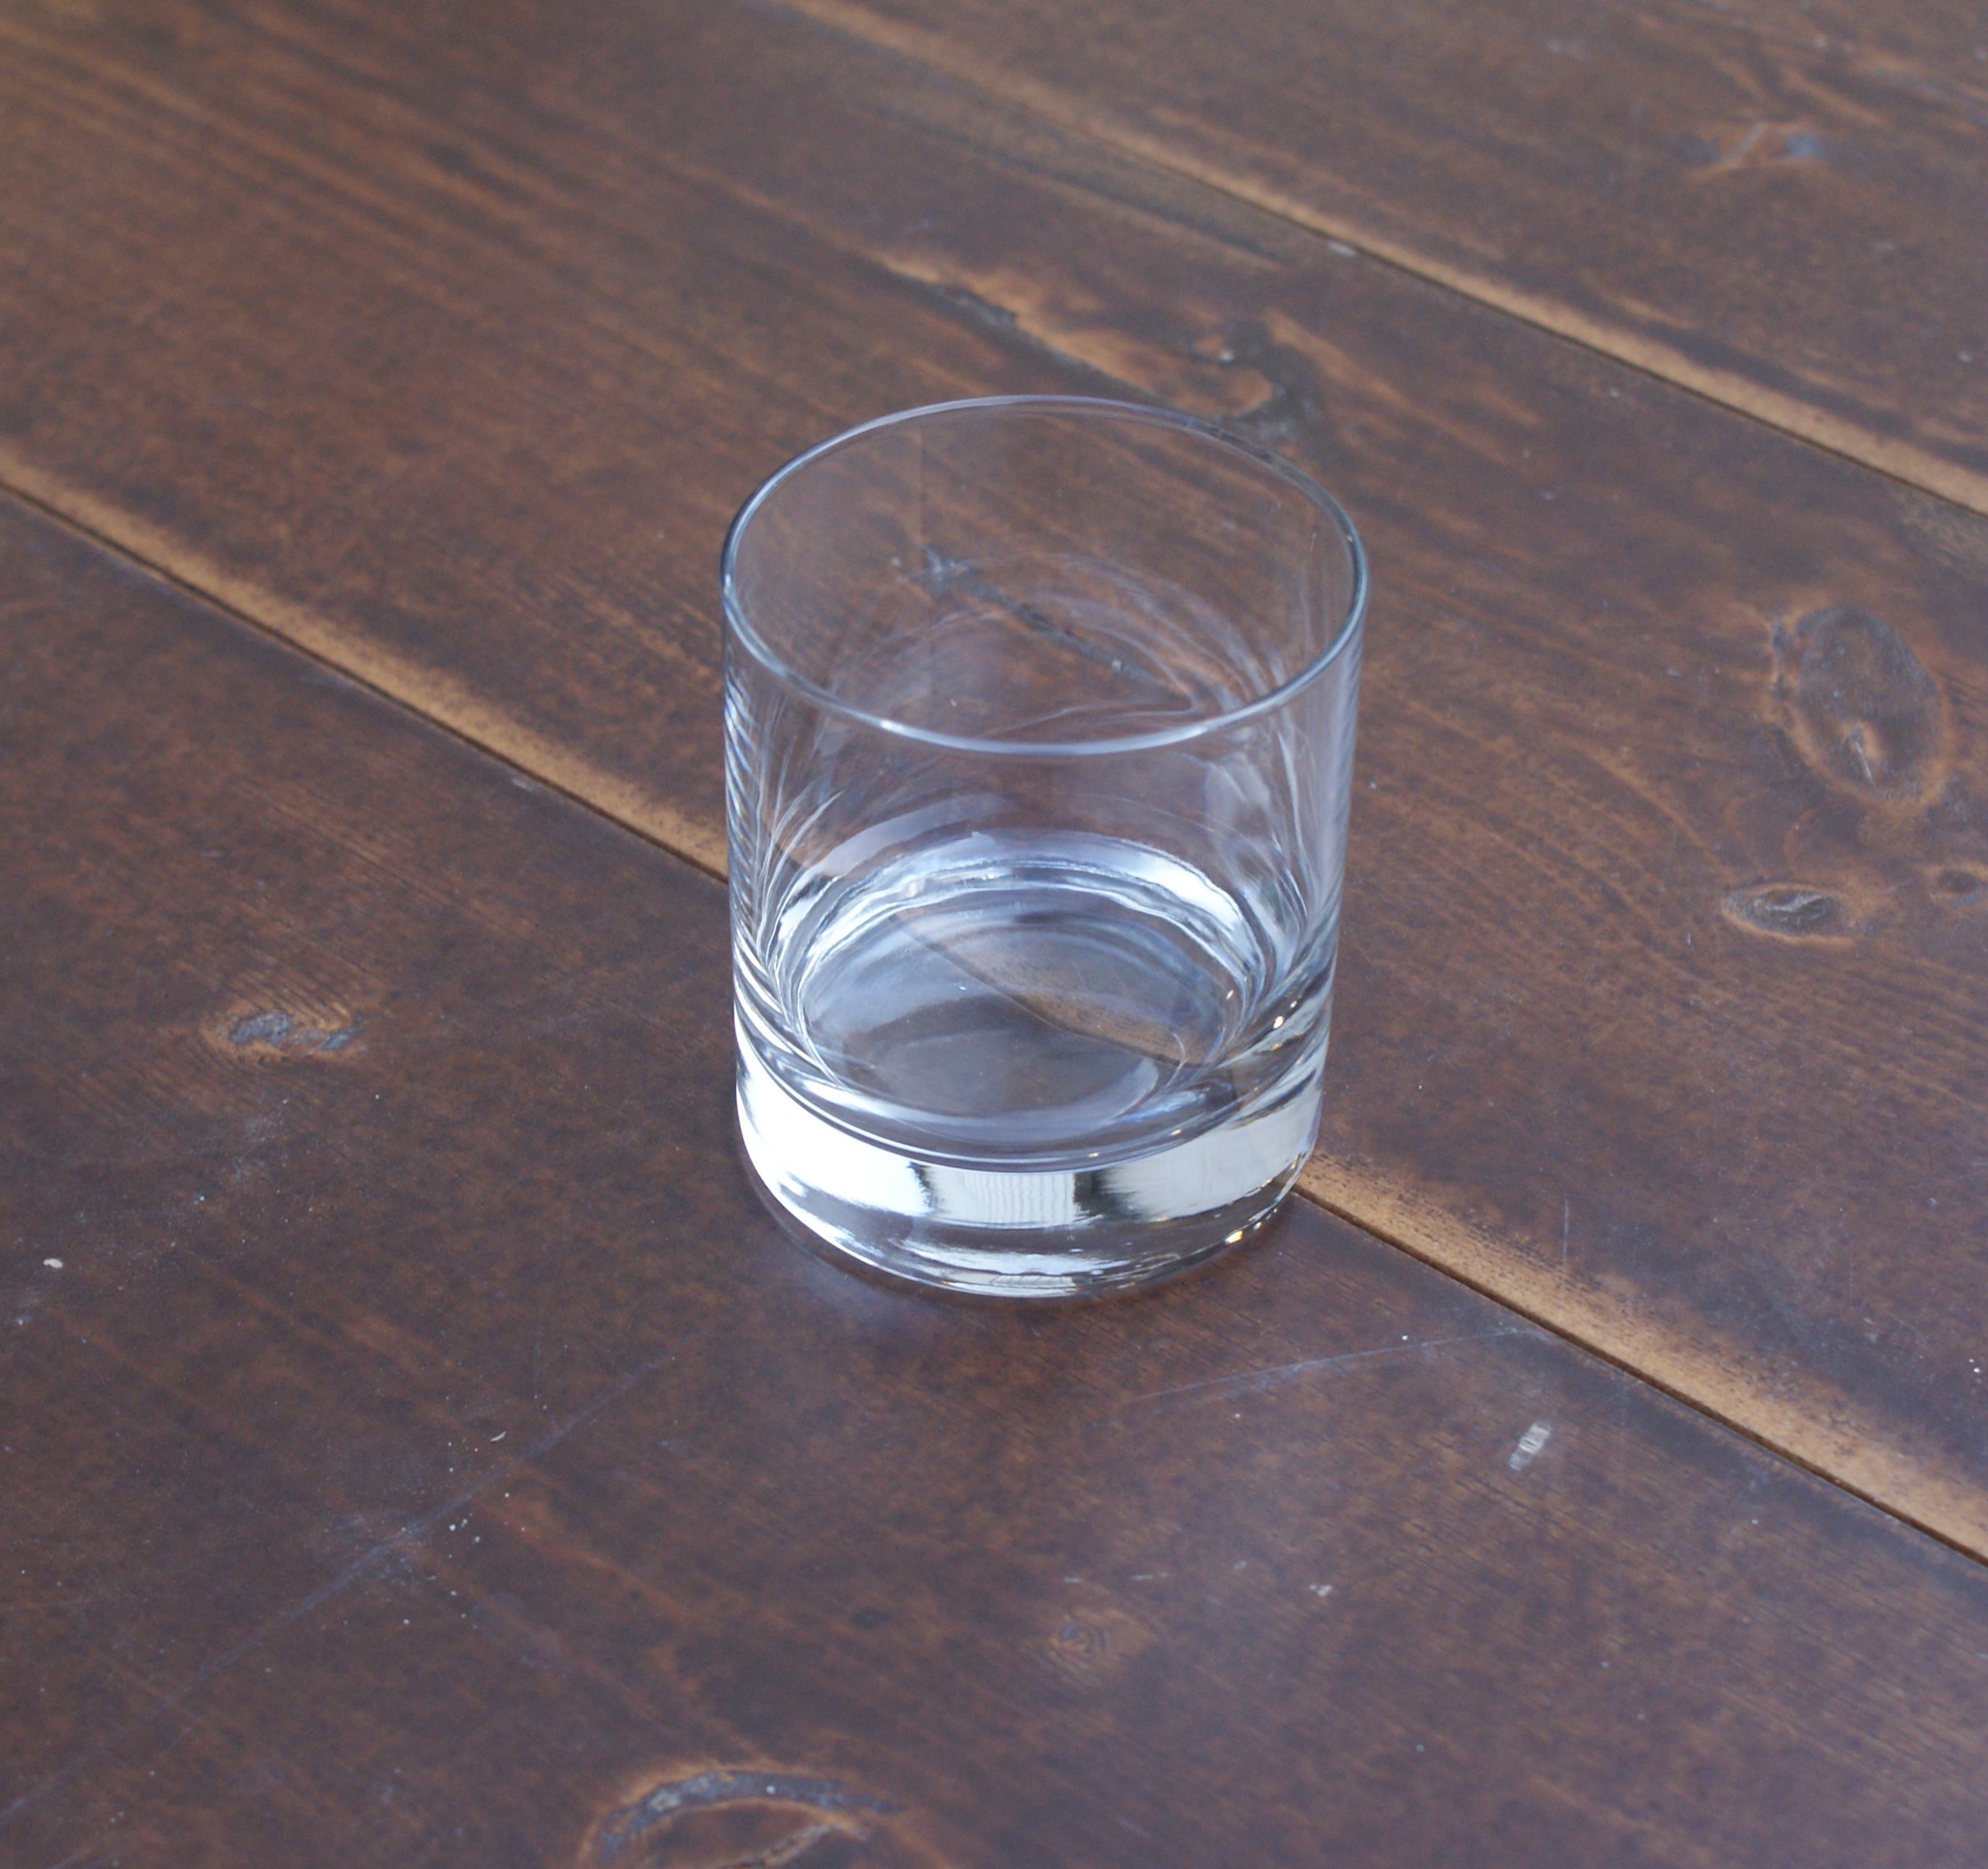 empty whiskey glass on a wood table